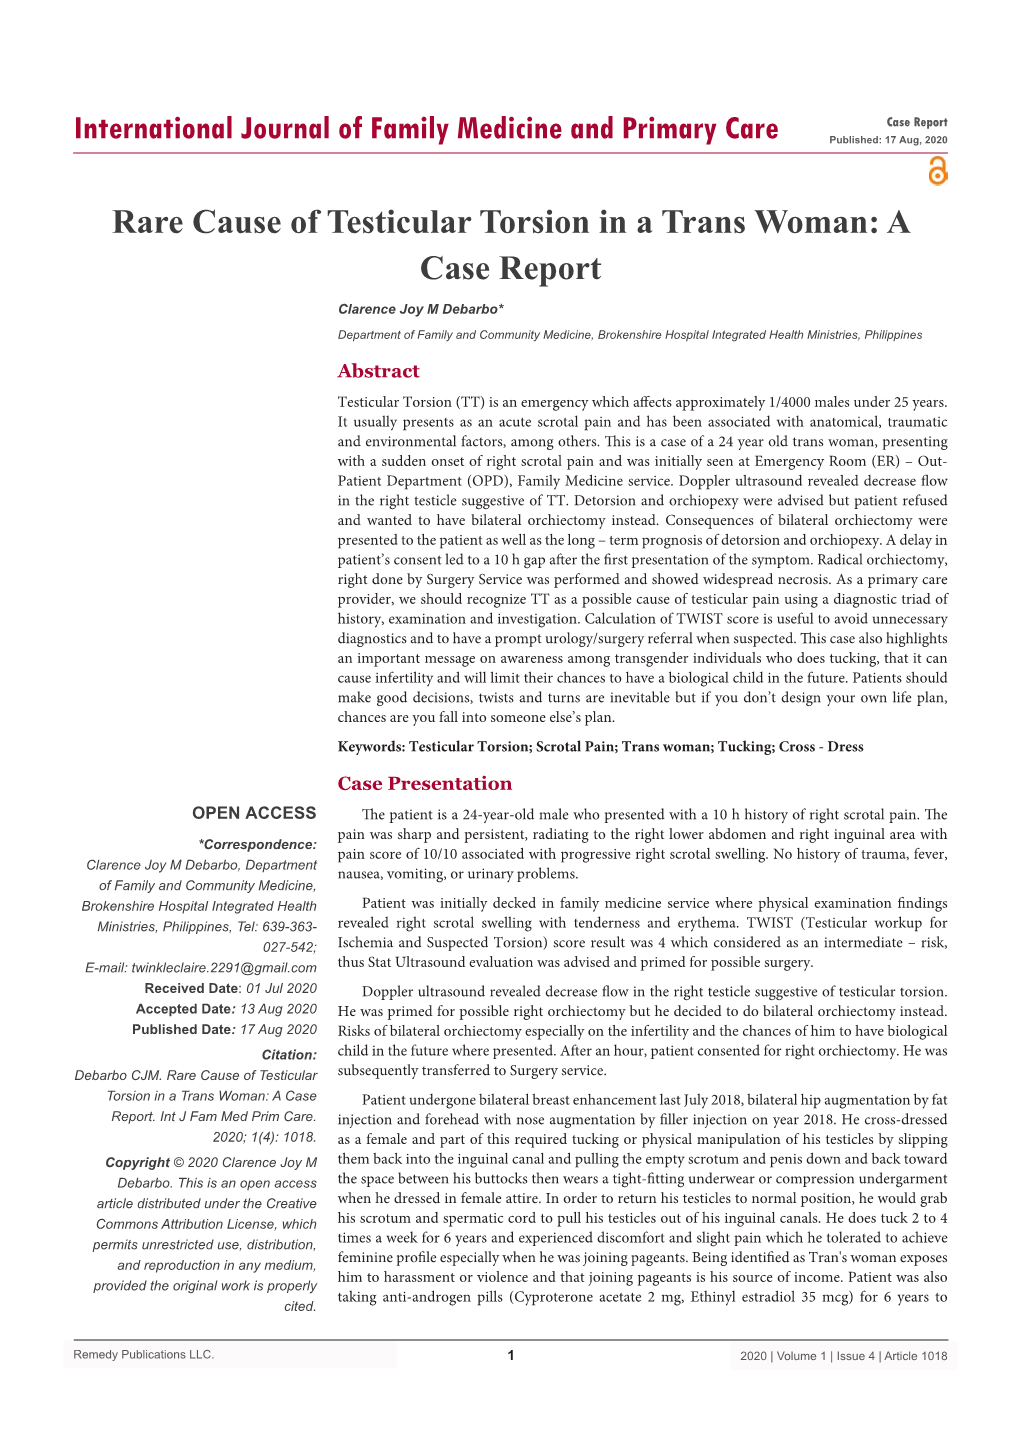 Rare Cause of Testicular Torsion in a Trans Woman: a Case Report